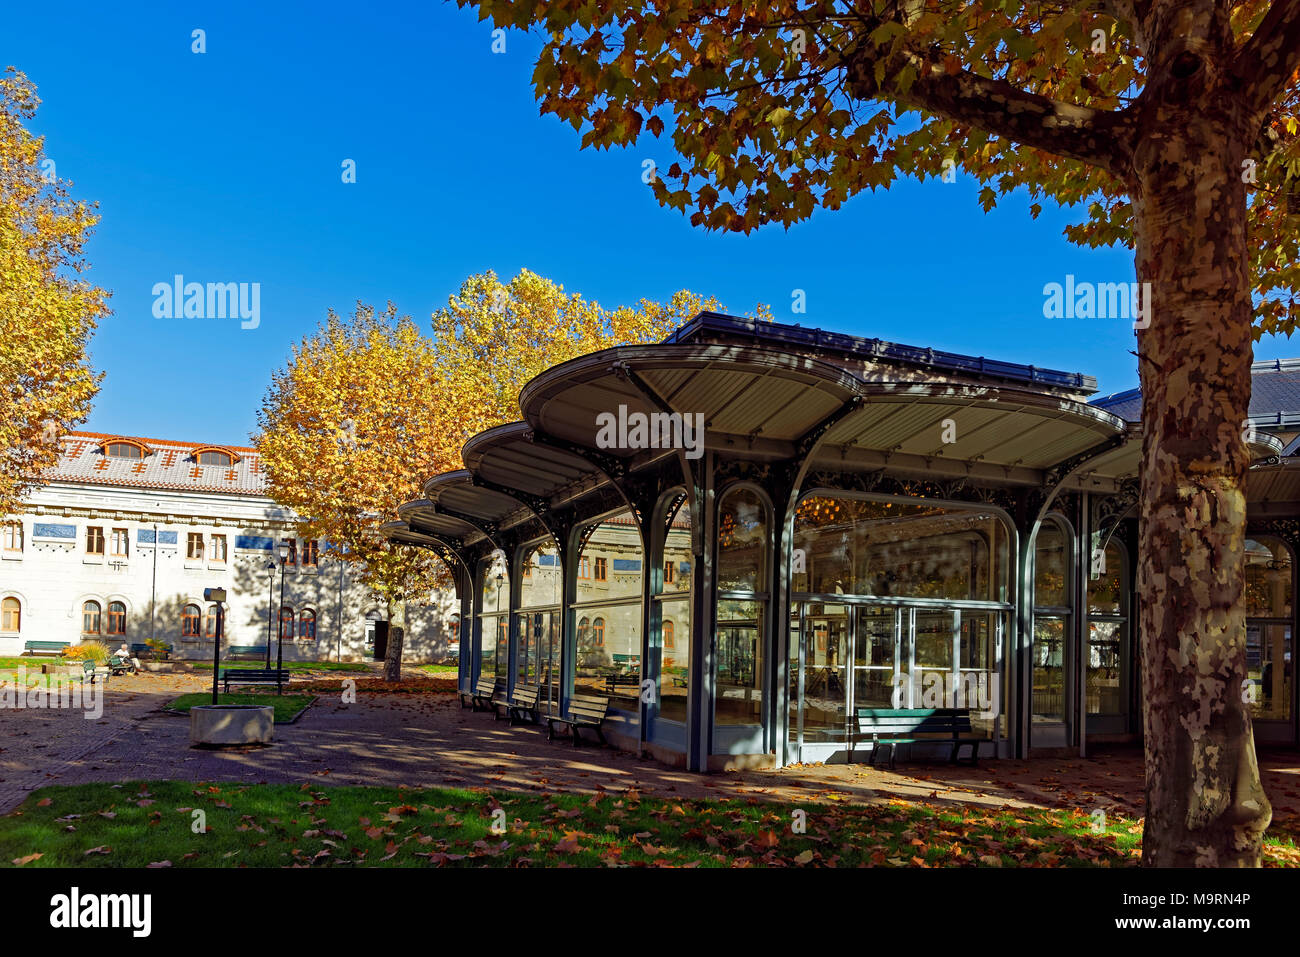 Europe, France, Auvergne, Vichy, avenue Thermale, gallery of the Sources, pump room of the springs, autumn, colour of the leaves, building, historical Stock Photo